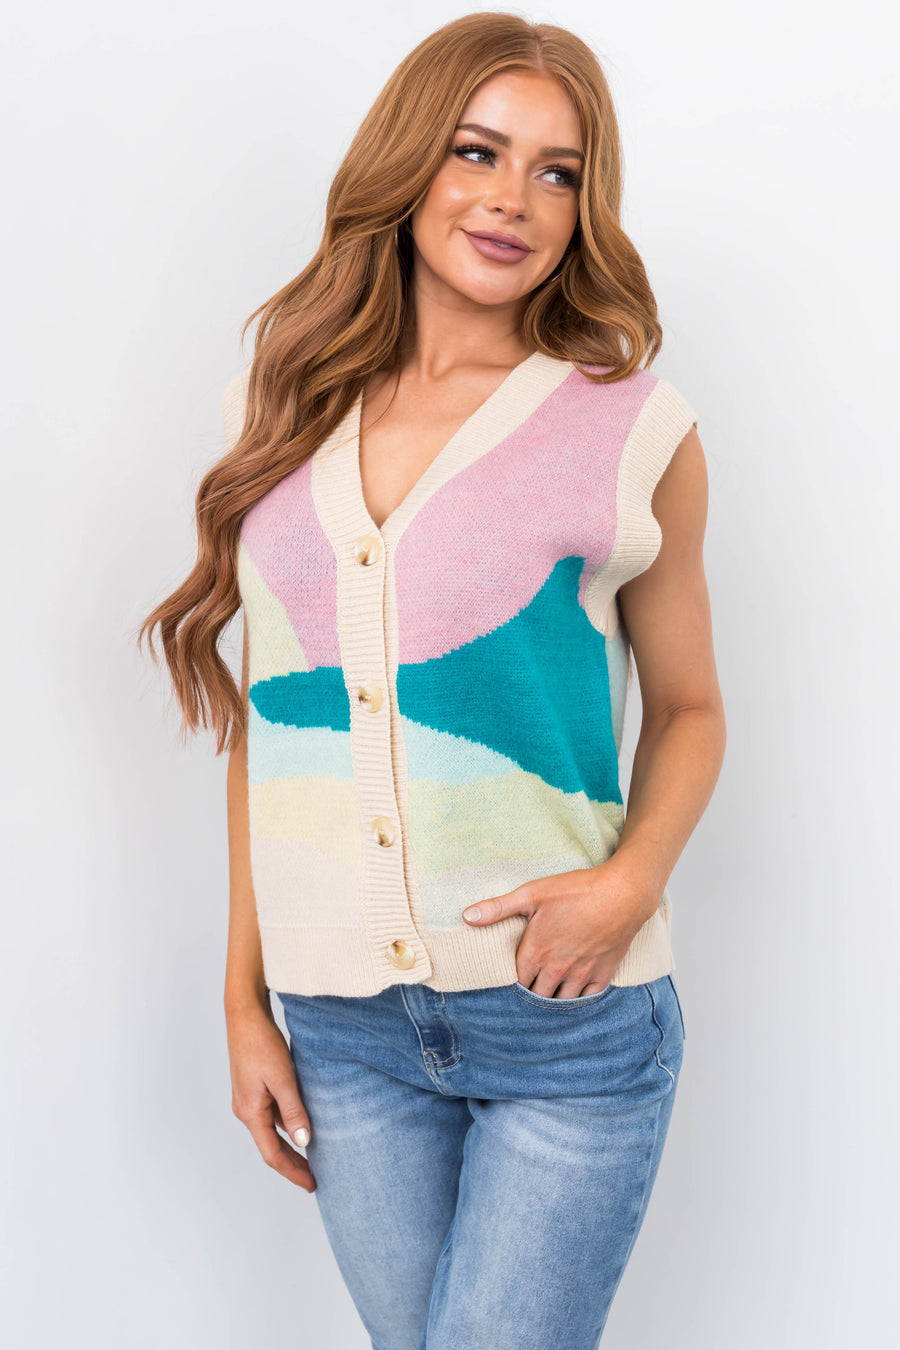 Cherry Blossom Patterned Sweater Vest